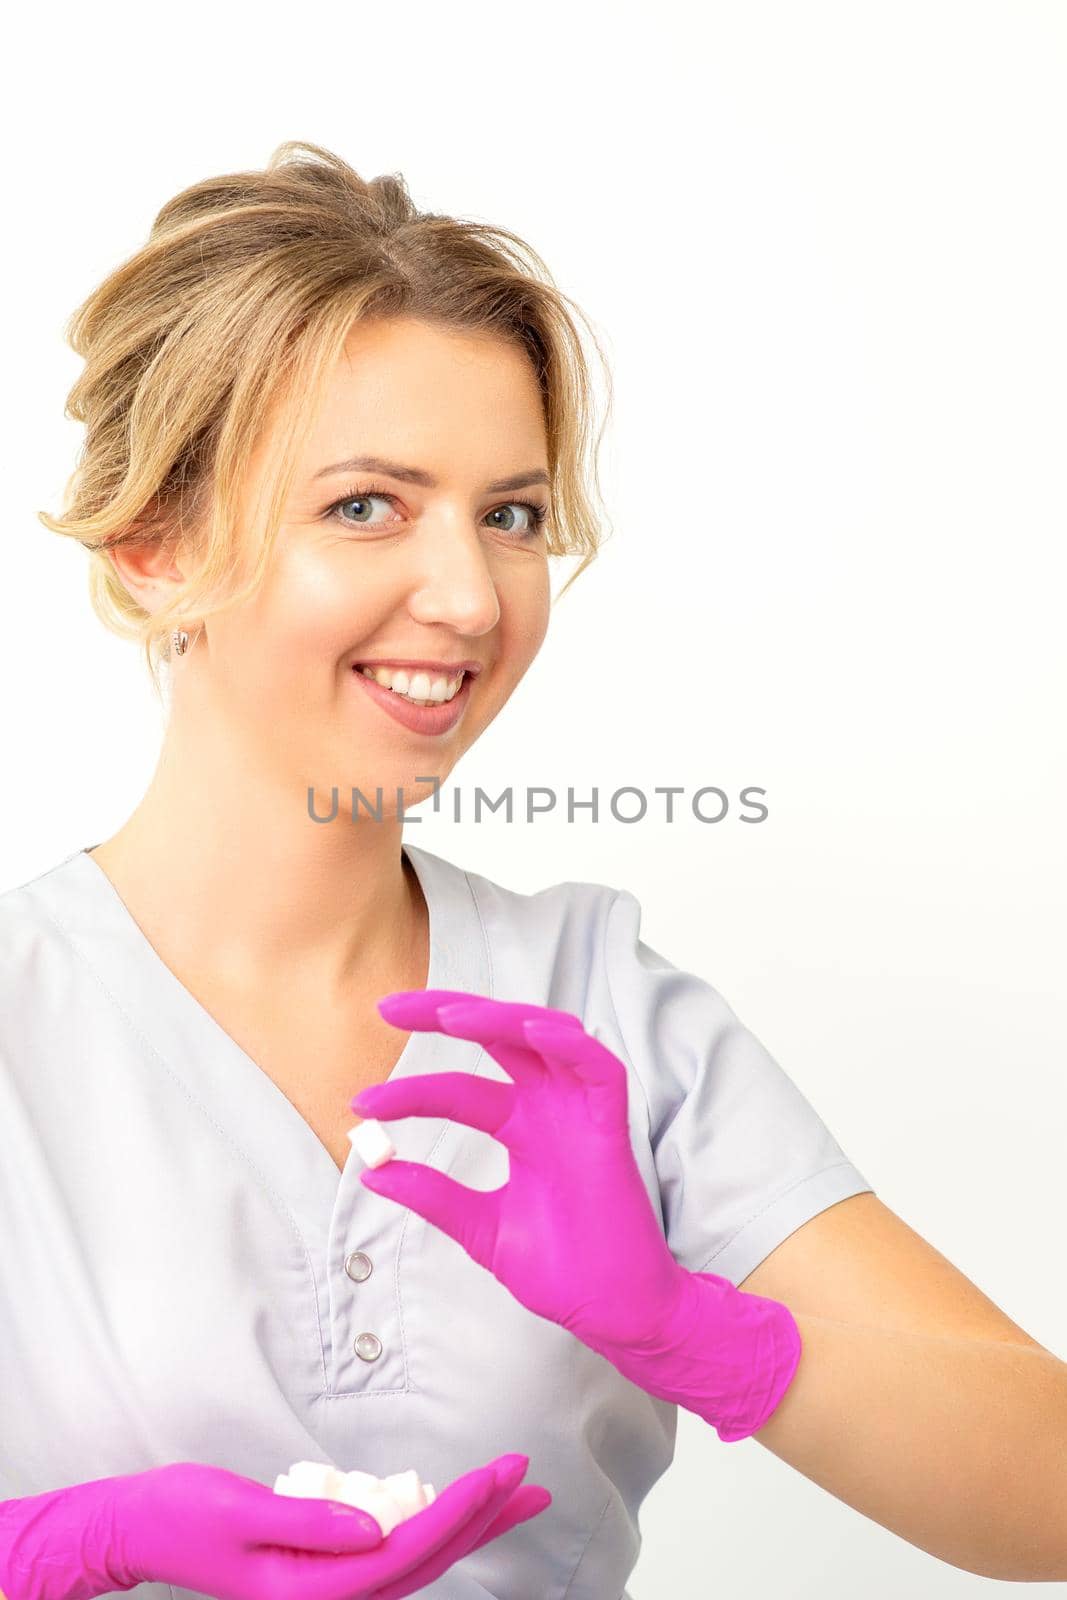 Portrait of a young smiling Caucasian beautician wearing pink gloves holding sugar cubes showing and looking at the camera against a white background. by okskukuruza